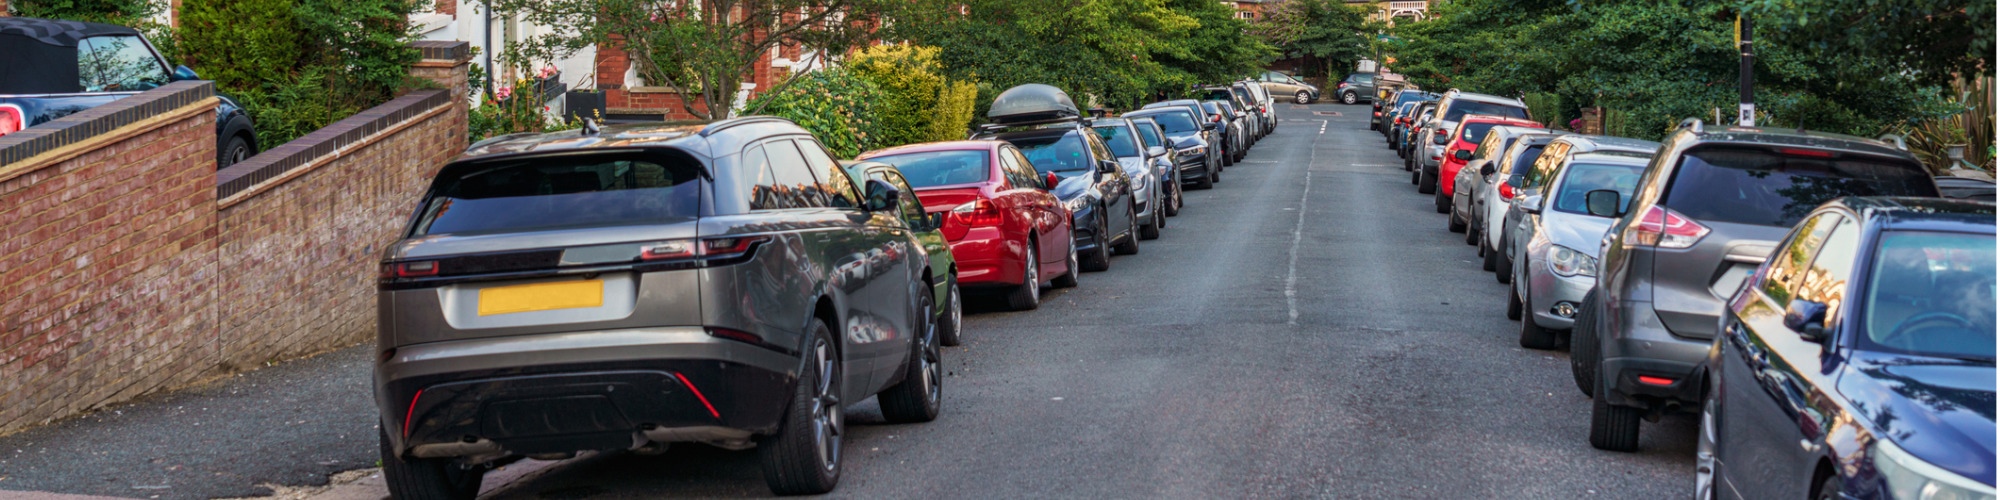 Protecting a Right to Park - Key Drafting Points for Conveyancers